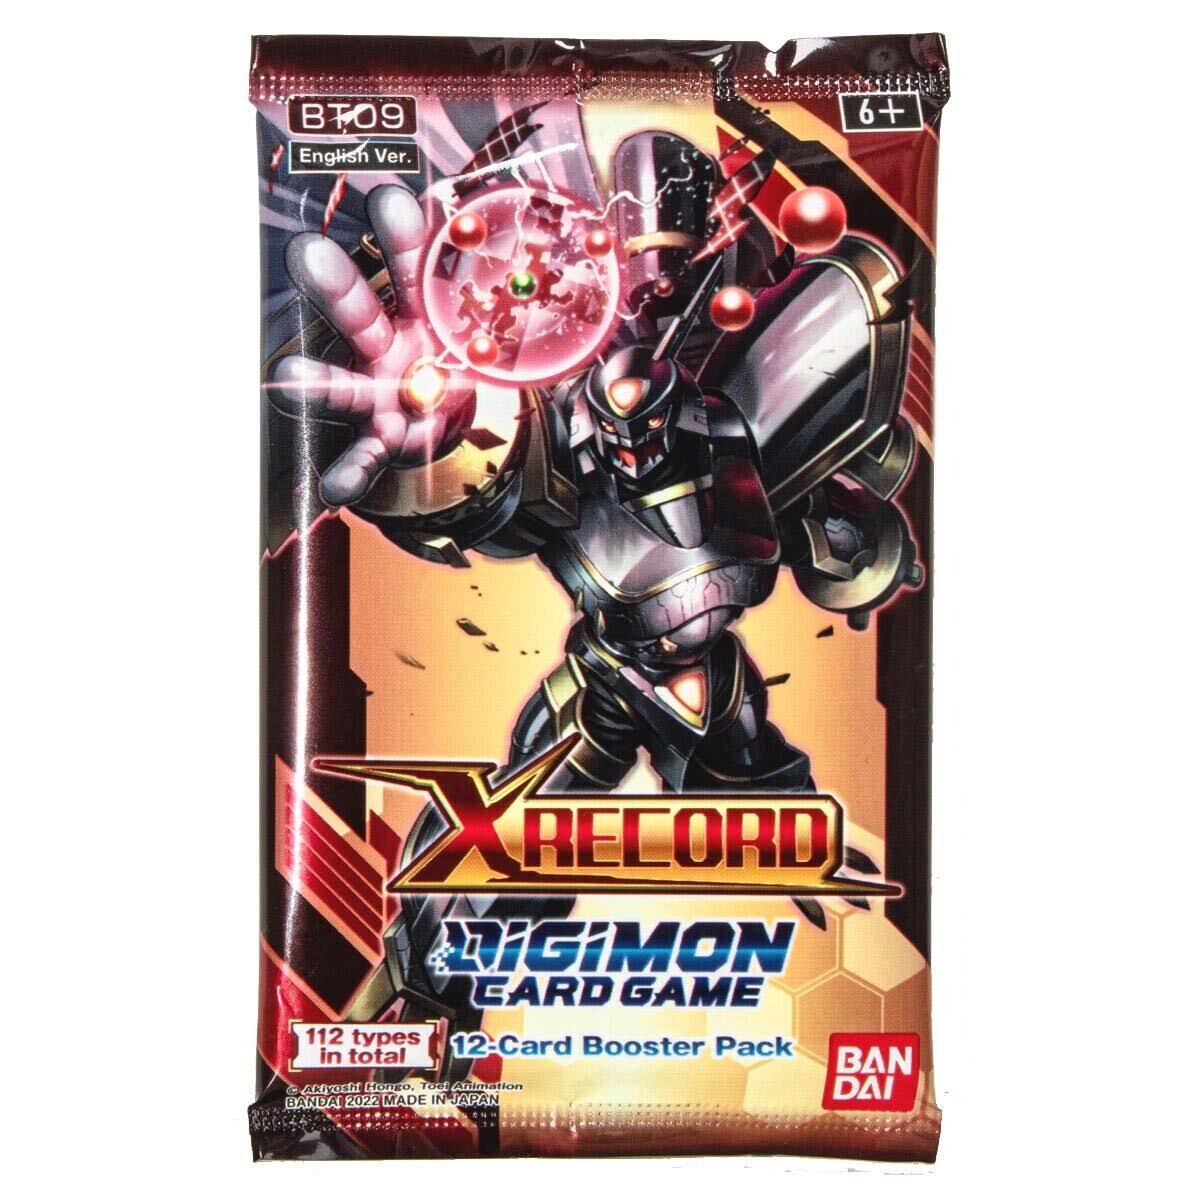 Digimon Card Game - x Record Booster Pack